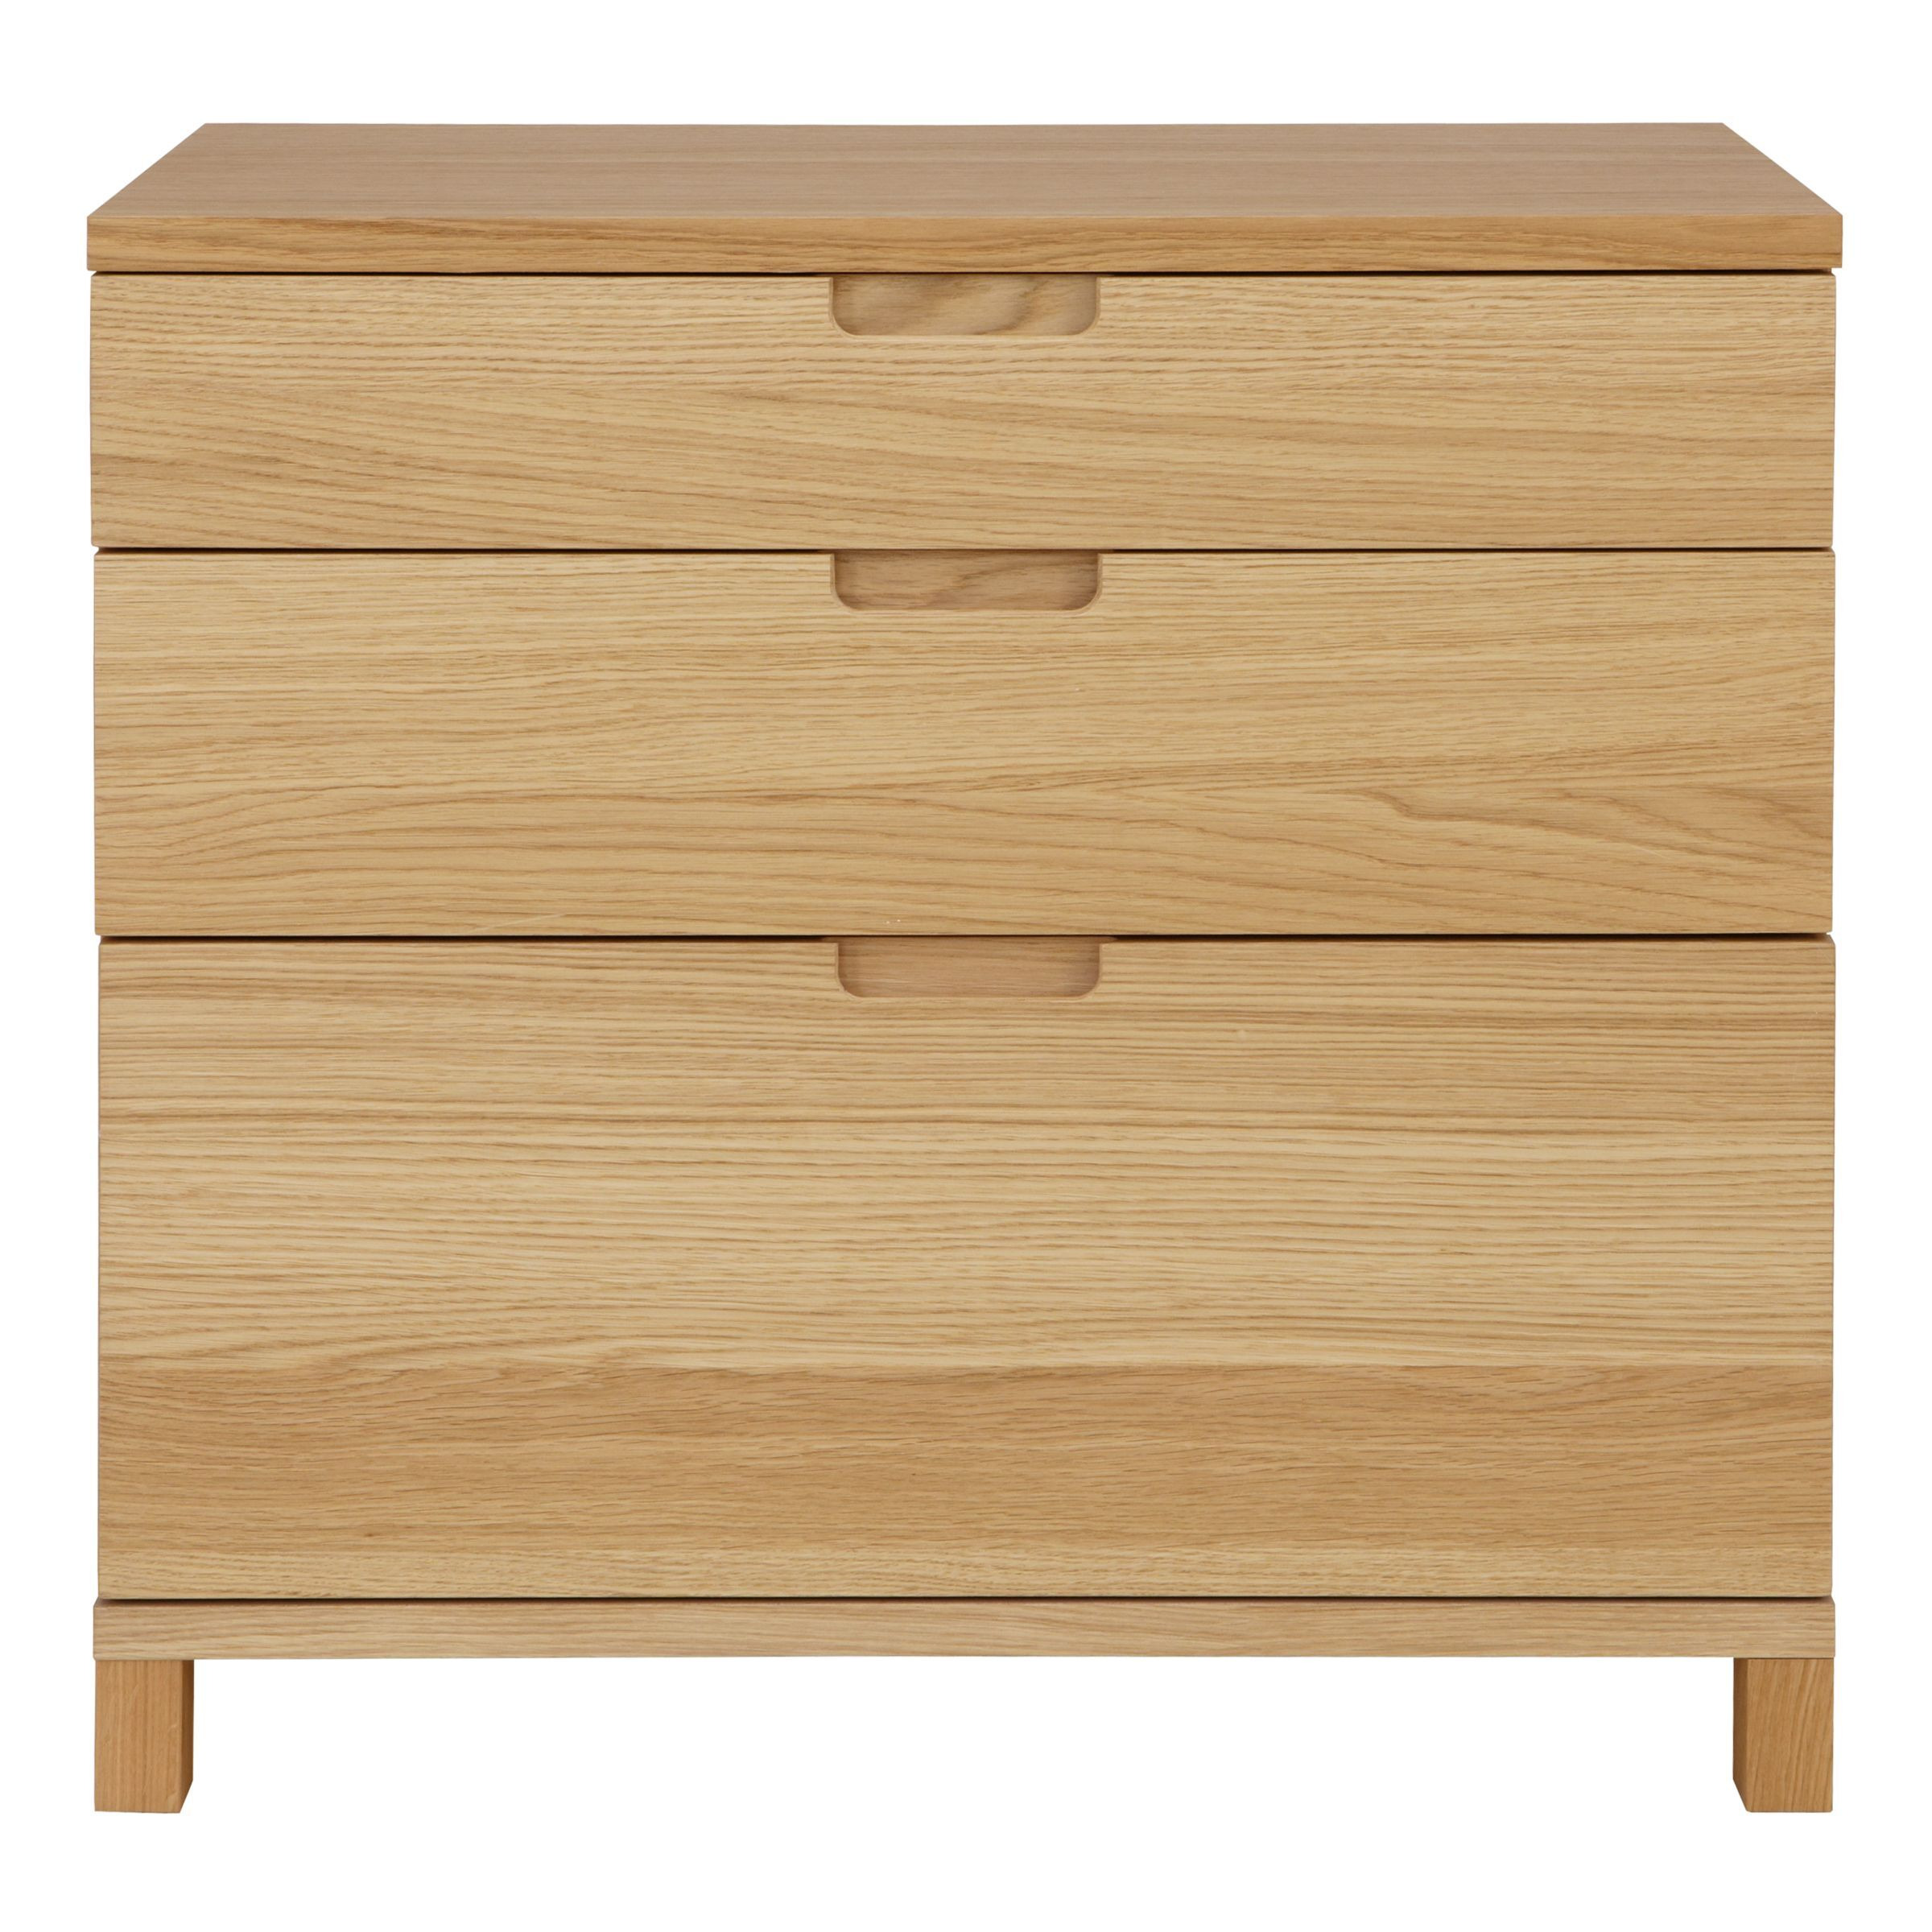 John Lewis Abacus 3-Drawer Wide Filing Chest, FSC-Certified (Oan Wood) - image 1